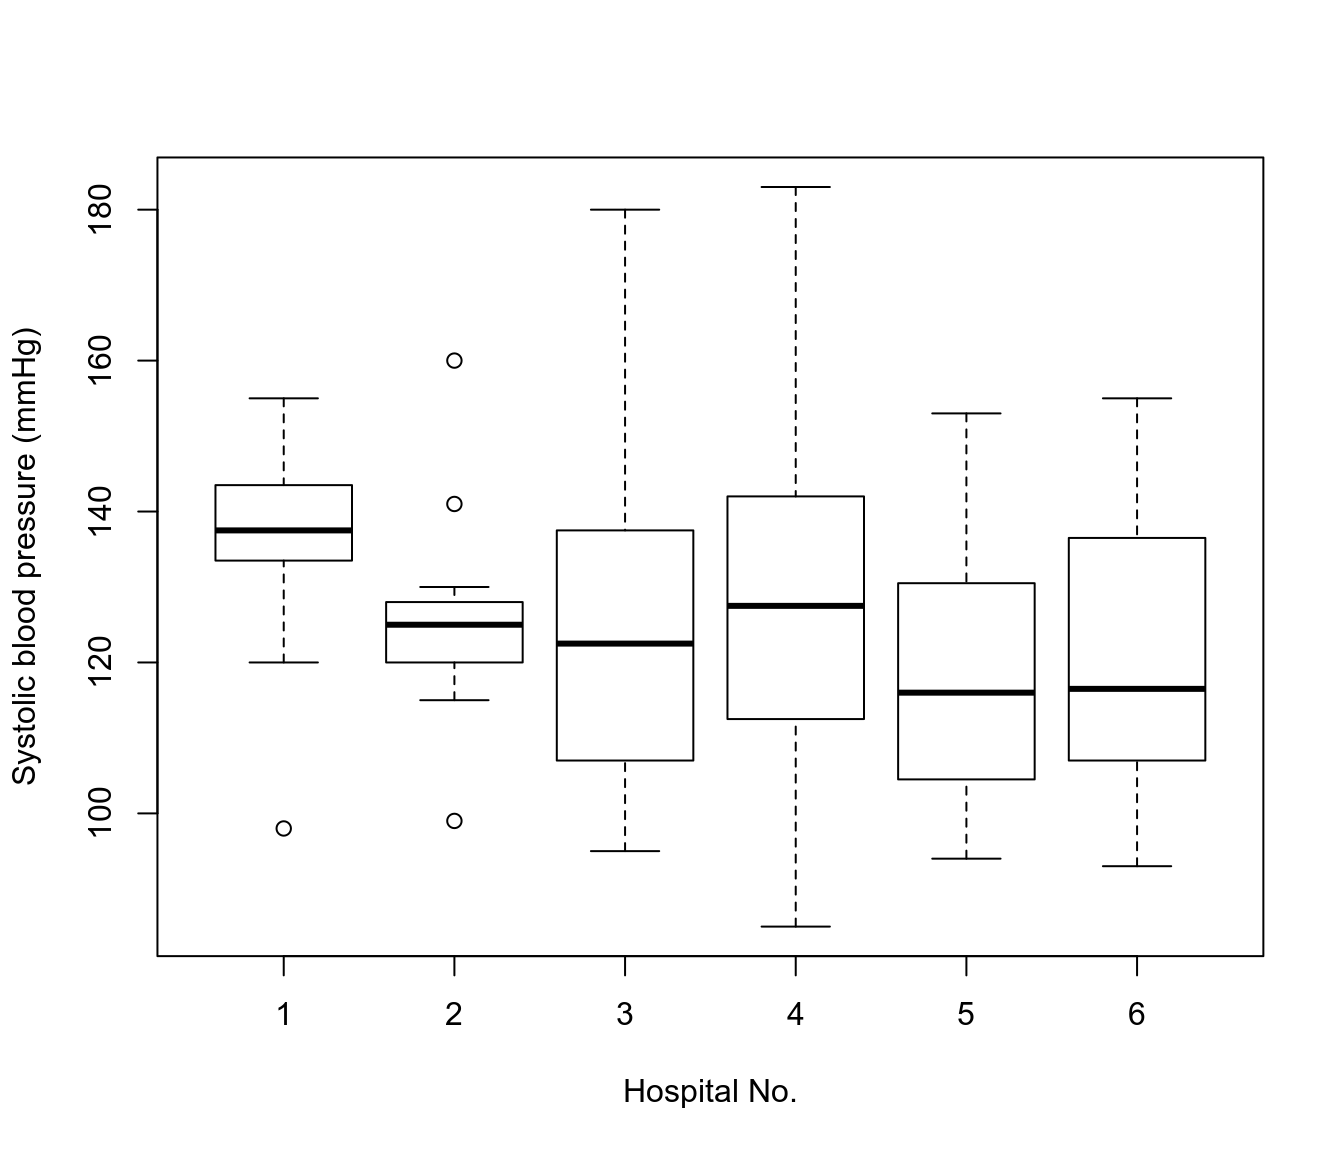 Box and whiskers plot of measured SBP in patients from six hospitals